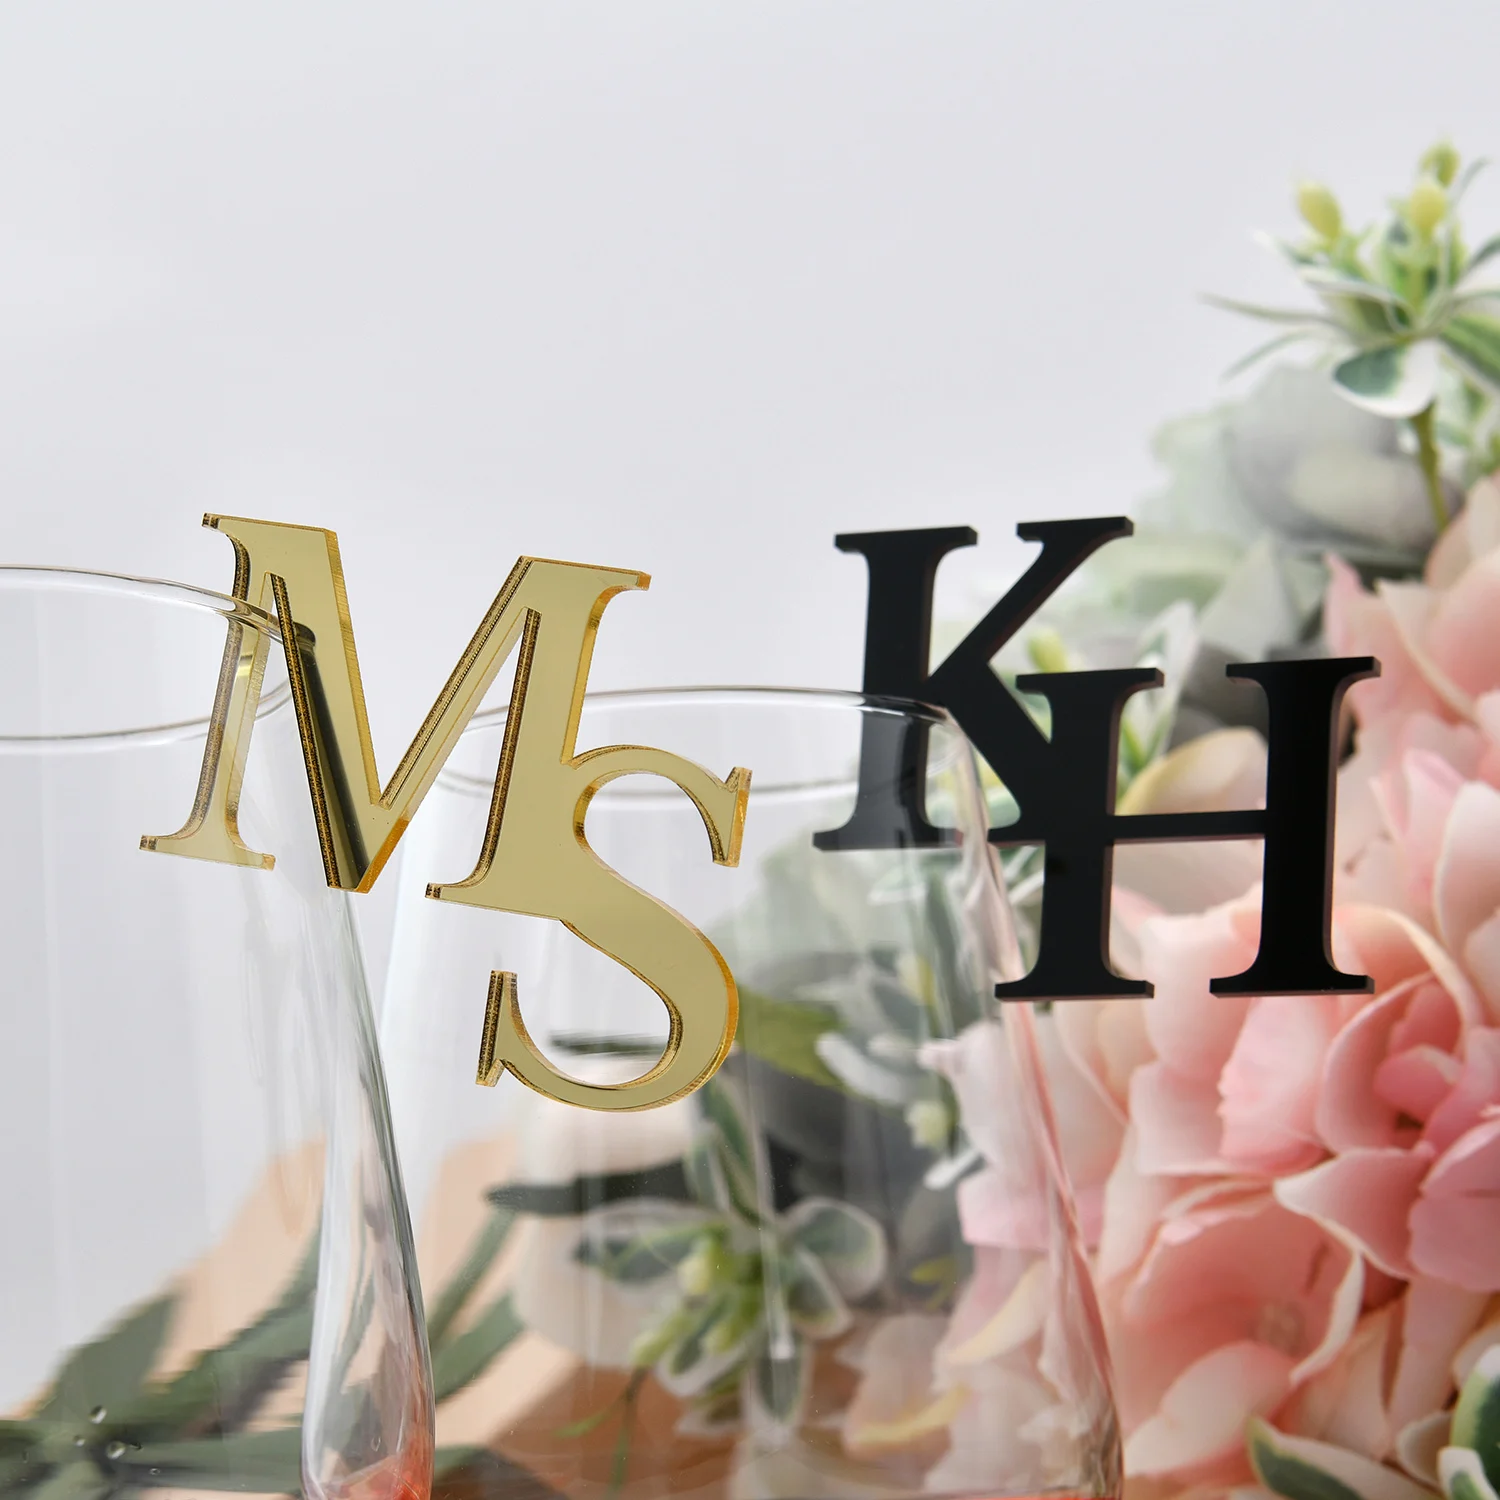 https://ae01.alicdn.com/kf/S53a9b9e43aed45d7825bfe8189971fe0K/20-50-100pcs-Personalized-Cut-Wedding-Drink-Tags-Glass-Topper-Drink-Stirrers-Bar-Sign-Glass-Marker.jpg